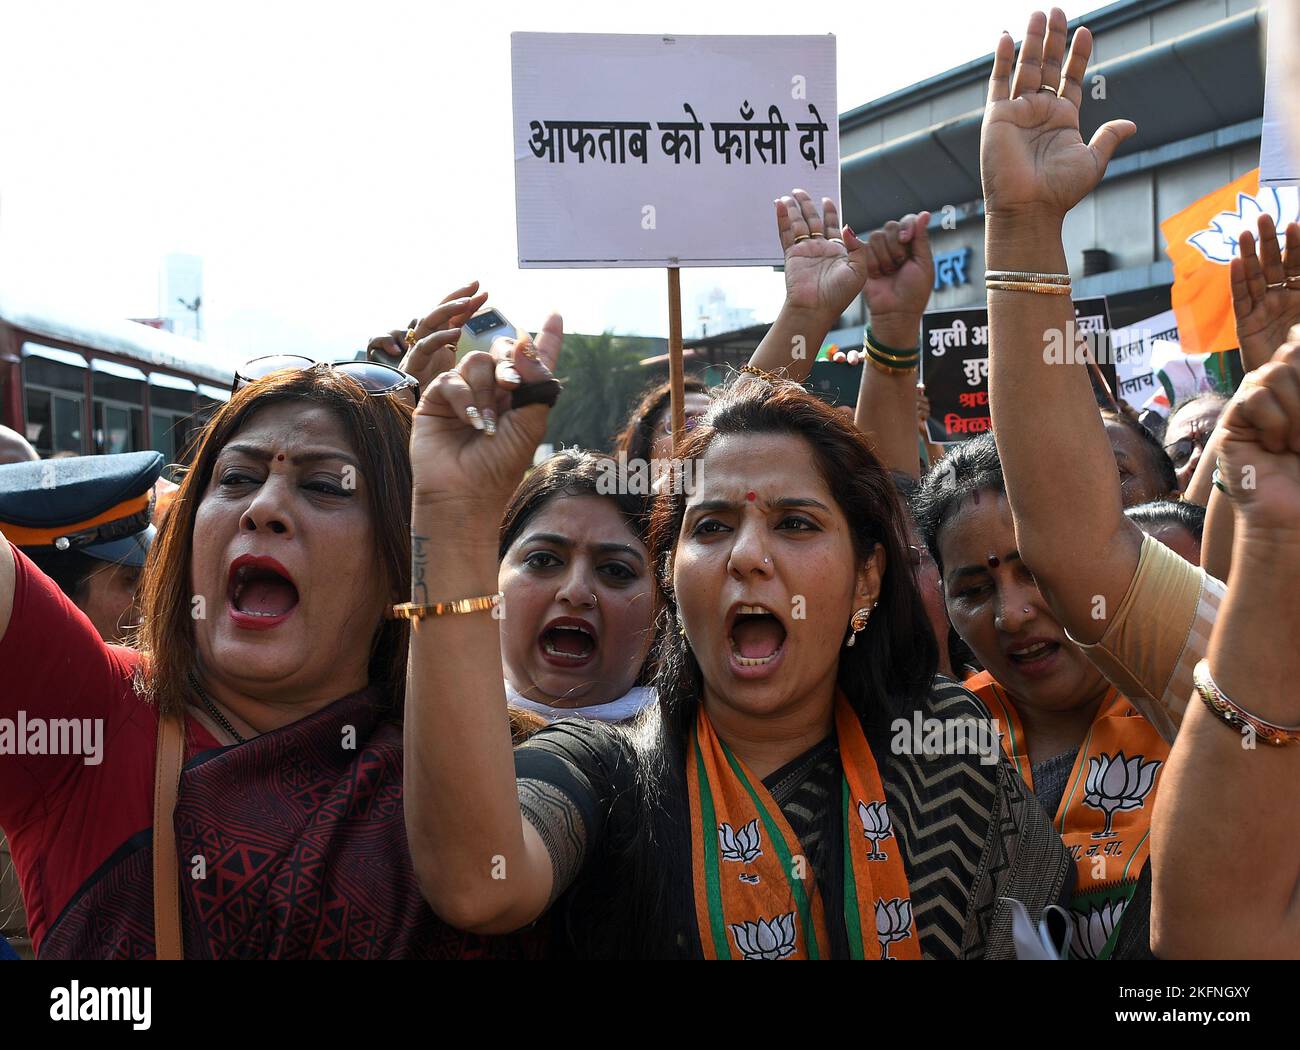 Mumbai, India. 19th Nov, 2022. Women supporters of Bharatiya Janata Party (BJP) chant slogans during the protest demanding Aftab Poonawala be hanged. Aaftab Poonawala murdered his girlfriend Shraddha Walkar who was his live-in partner and they stayed in Delhi. He cut her body parts into thirty five pieces and kept it in a fridge for almost three weeks before disposing it off in a jungle area in Delhi. Credit: SOPA Images Limited/Alamy Live News Stock Photo